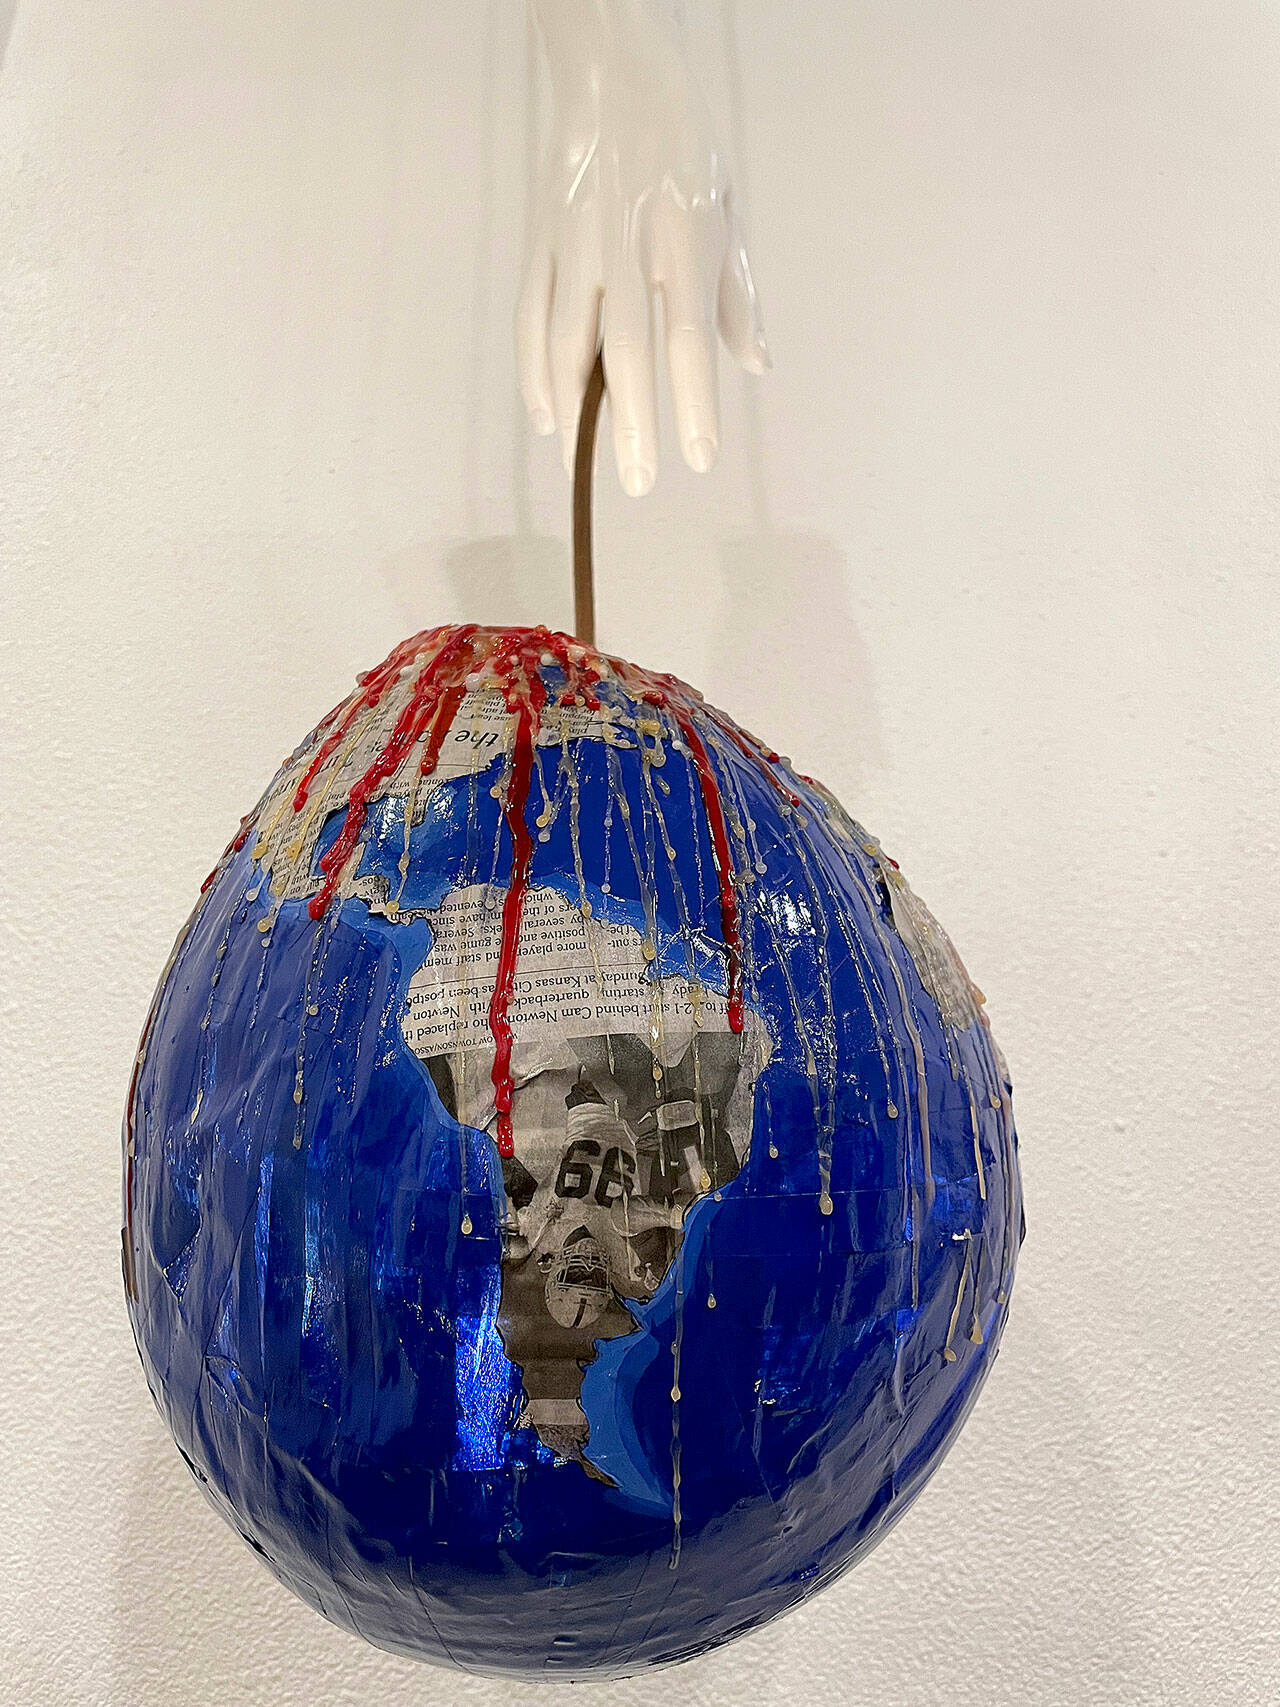 (Courtesy Photo) The climate crisis is encapsulated in a simple yet powerful sculptural work, “2040,” by Grace Smith and Kaiya Van Brost — part of “Crash Course in Activist Art,” at the Blue Heron Education Center.